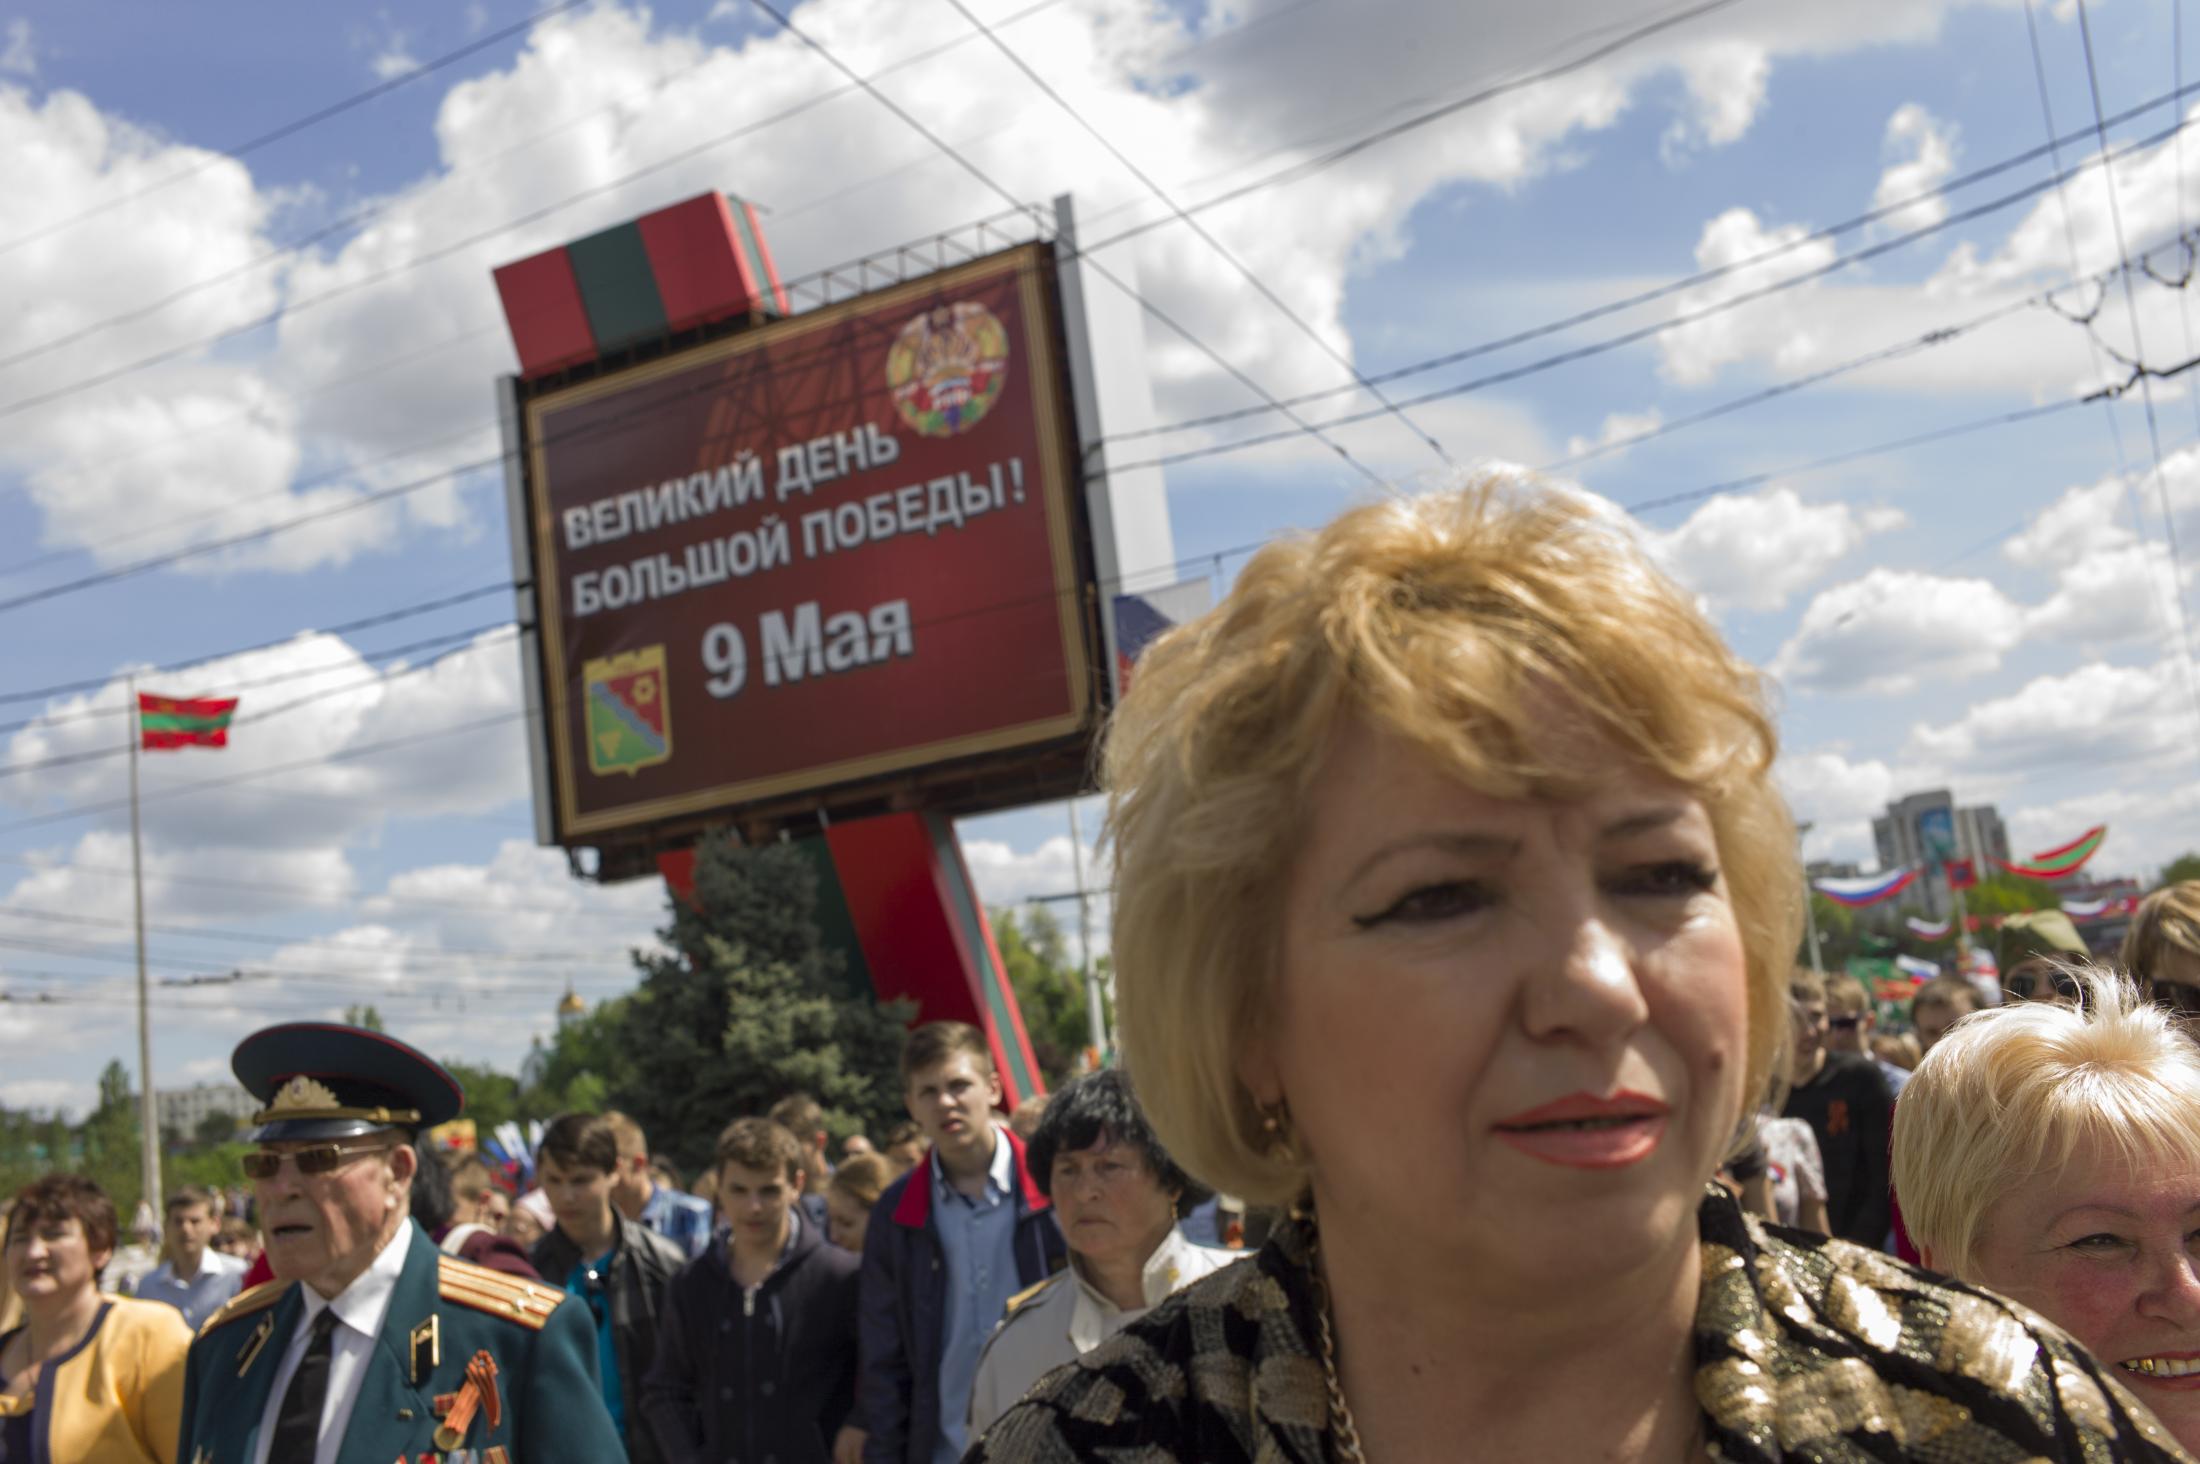 Victory Day in Transnistria